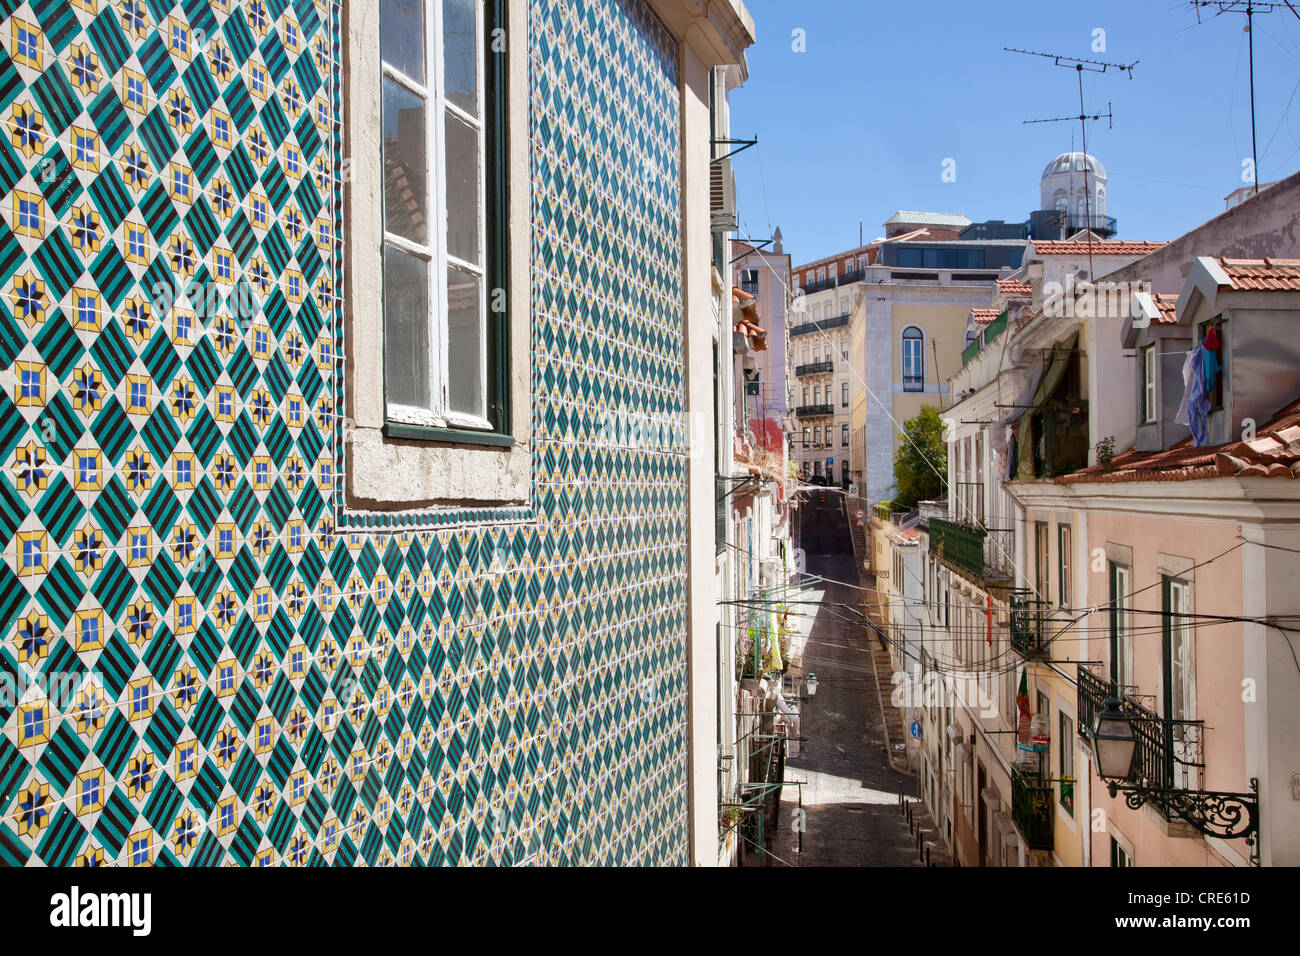 House facade with colourful tiles in the district of Bairro Alto, Lisbon, Portugal, Europe Stock Photo